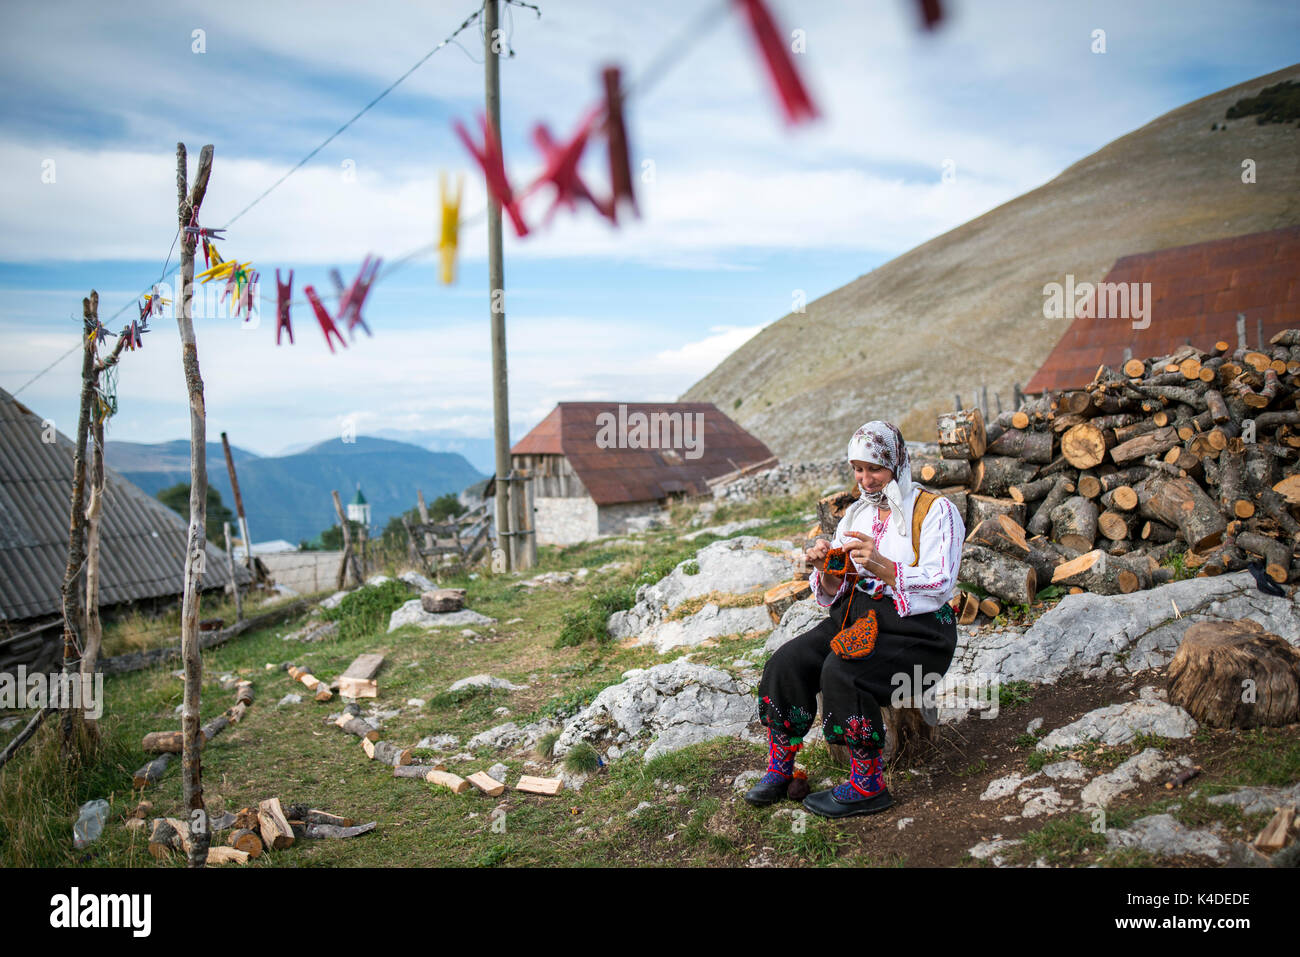 Lukomir, the last village in Bosnia is tourist destinations for hikers and off road adventures. Village is alt 1500m above sea level famous for wool Stock Photo